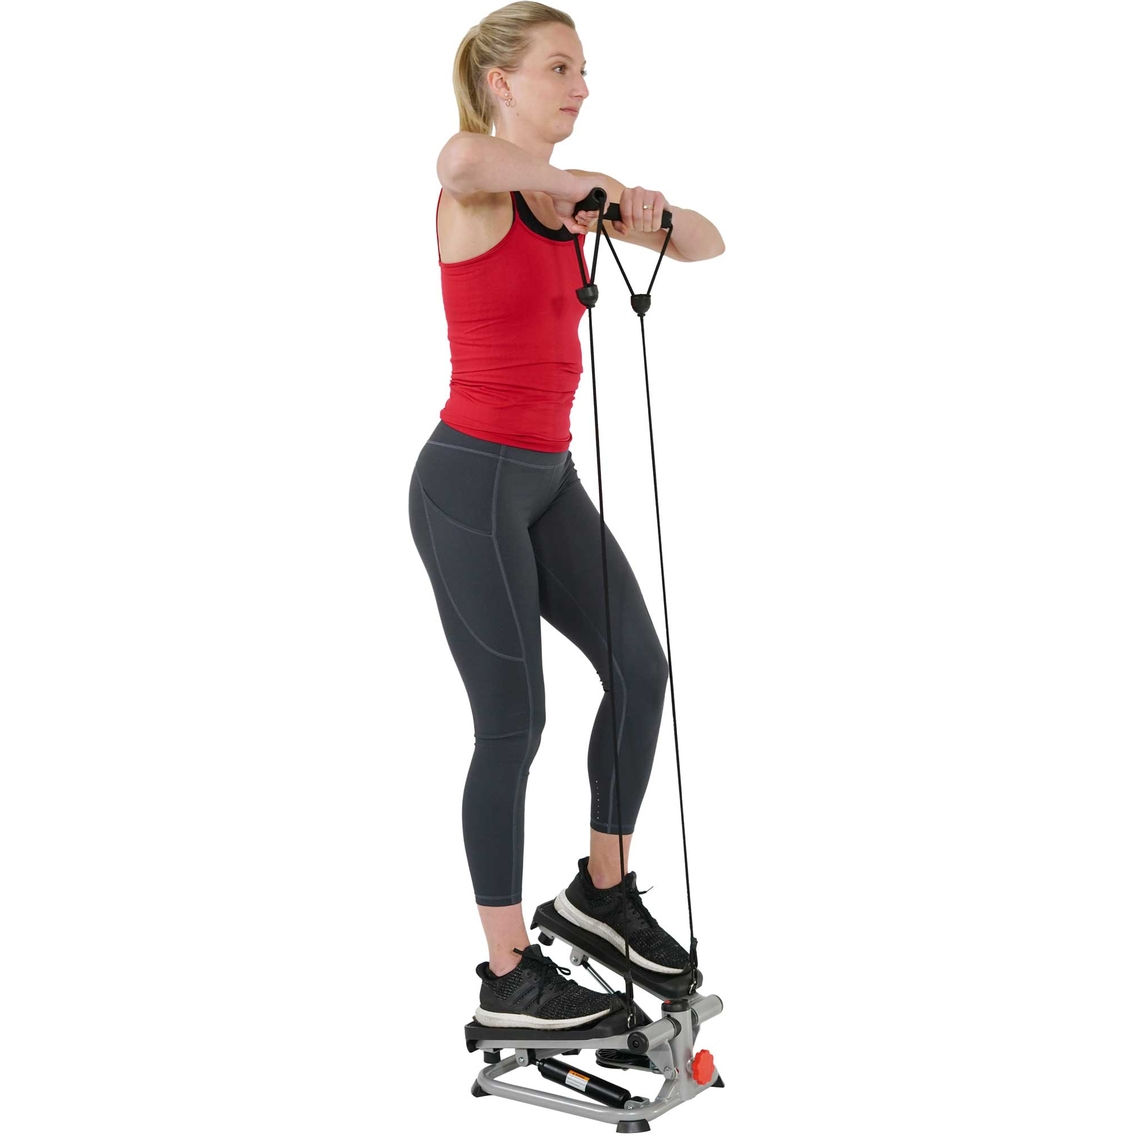 Sunny Health & Fitness Total Body Stepper Machine - Image 3 of 4